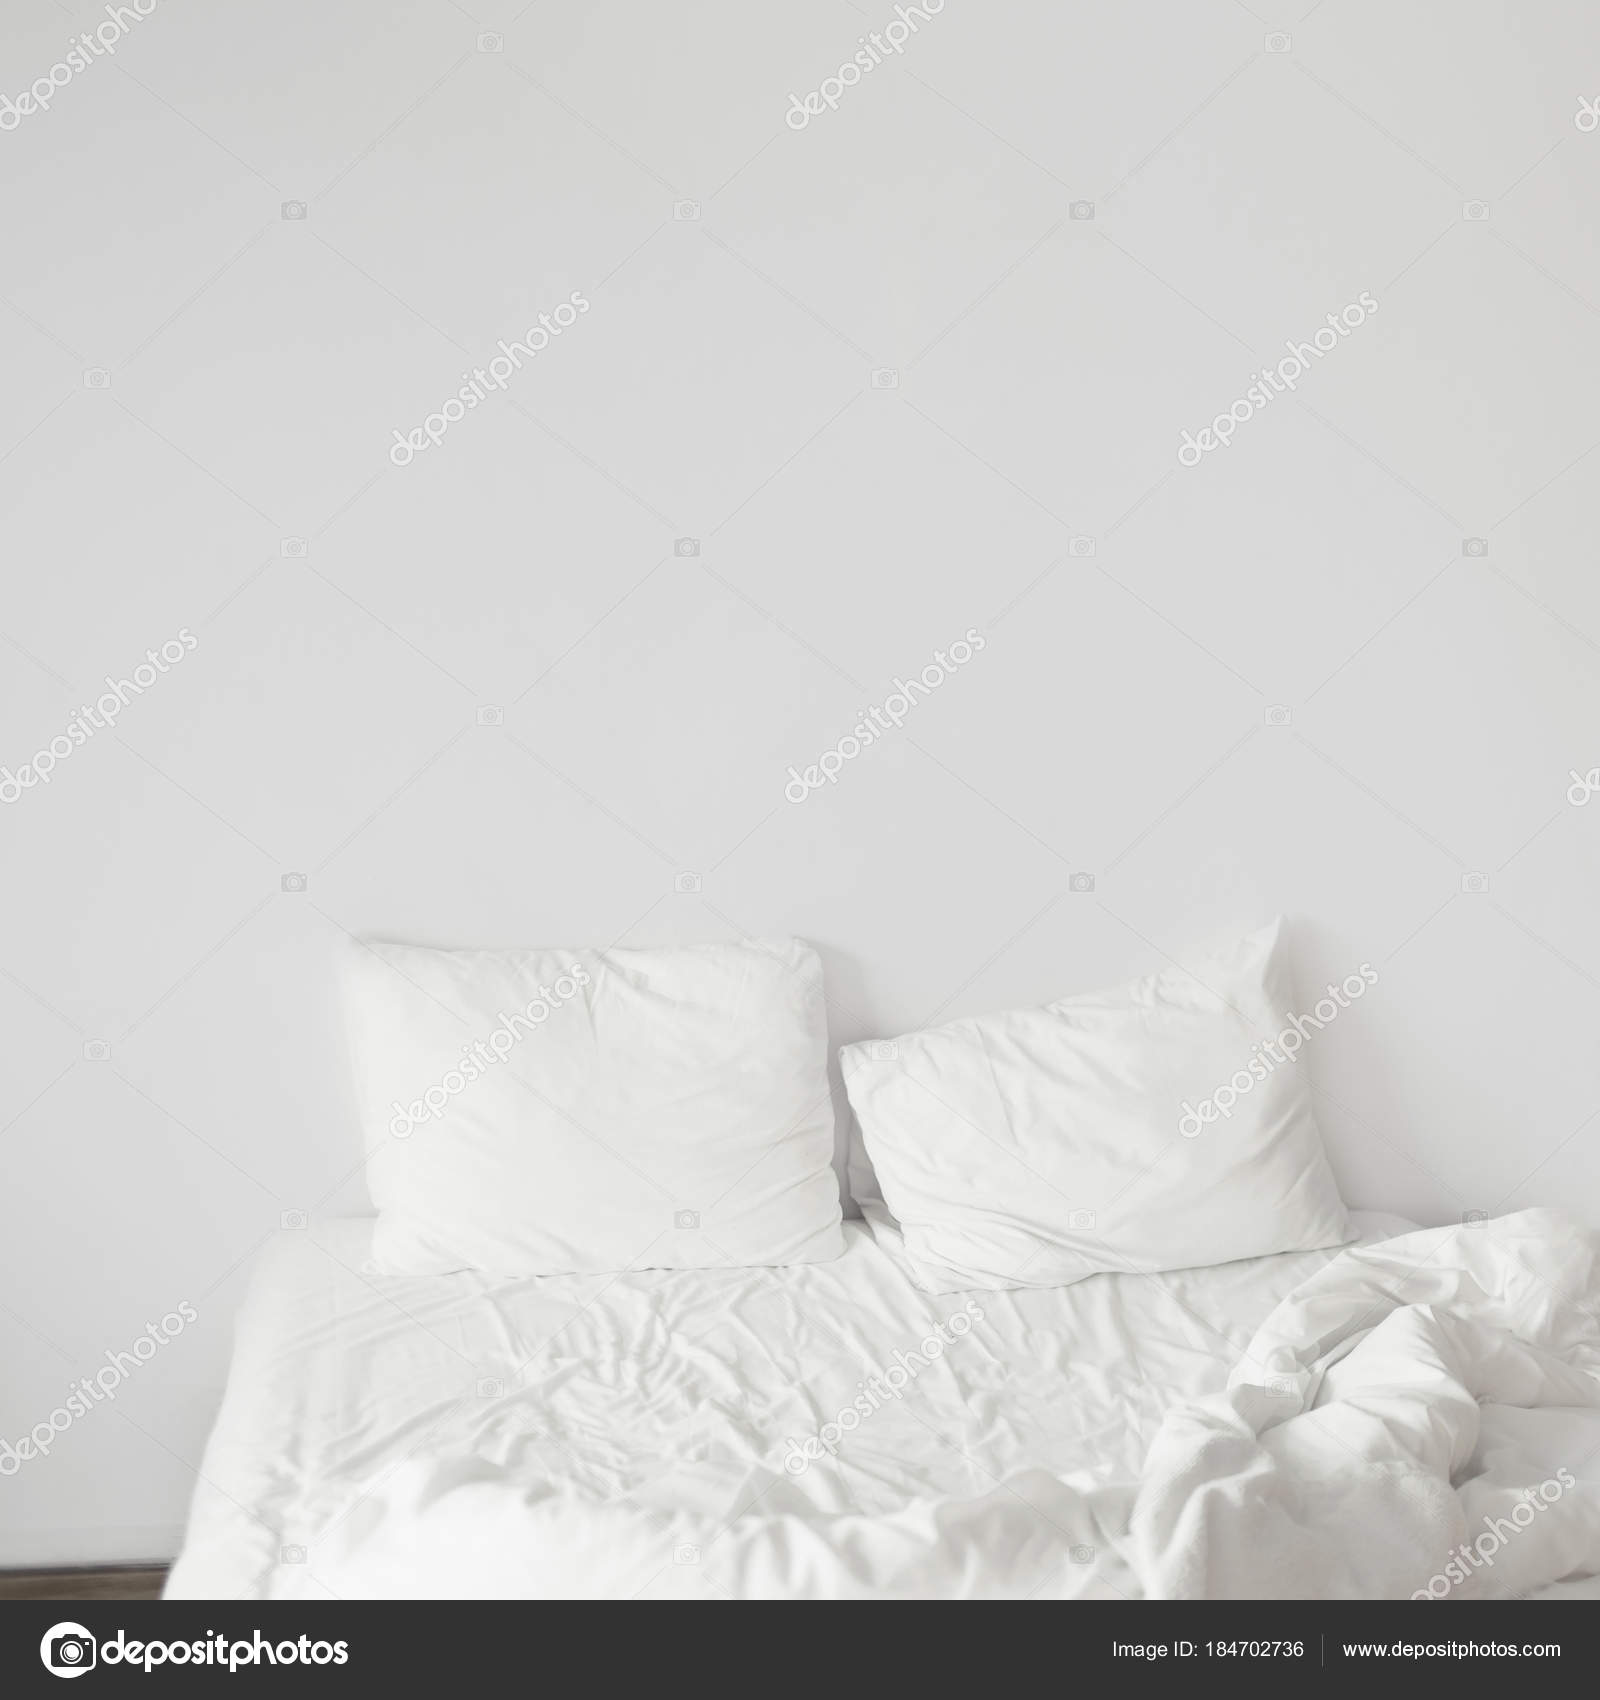 White bed sheets Stock Photos, Royalty Free White bed sheets Images |  Depositphotos